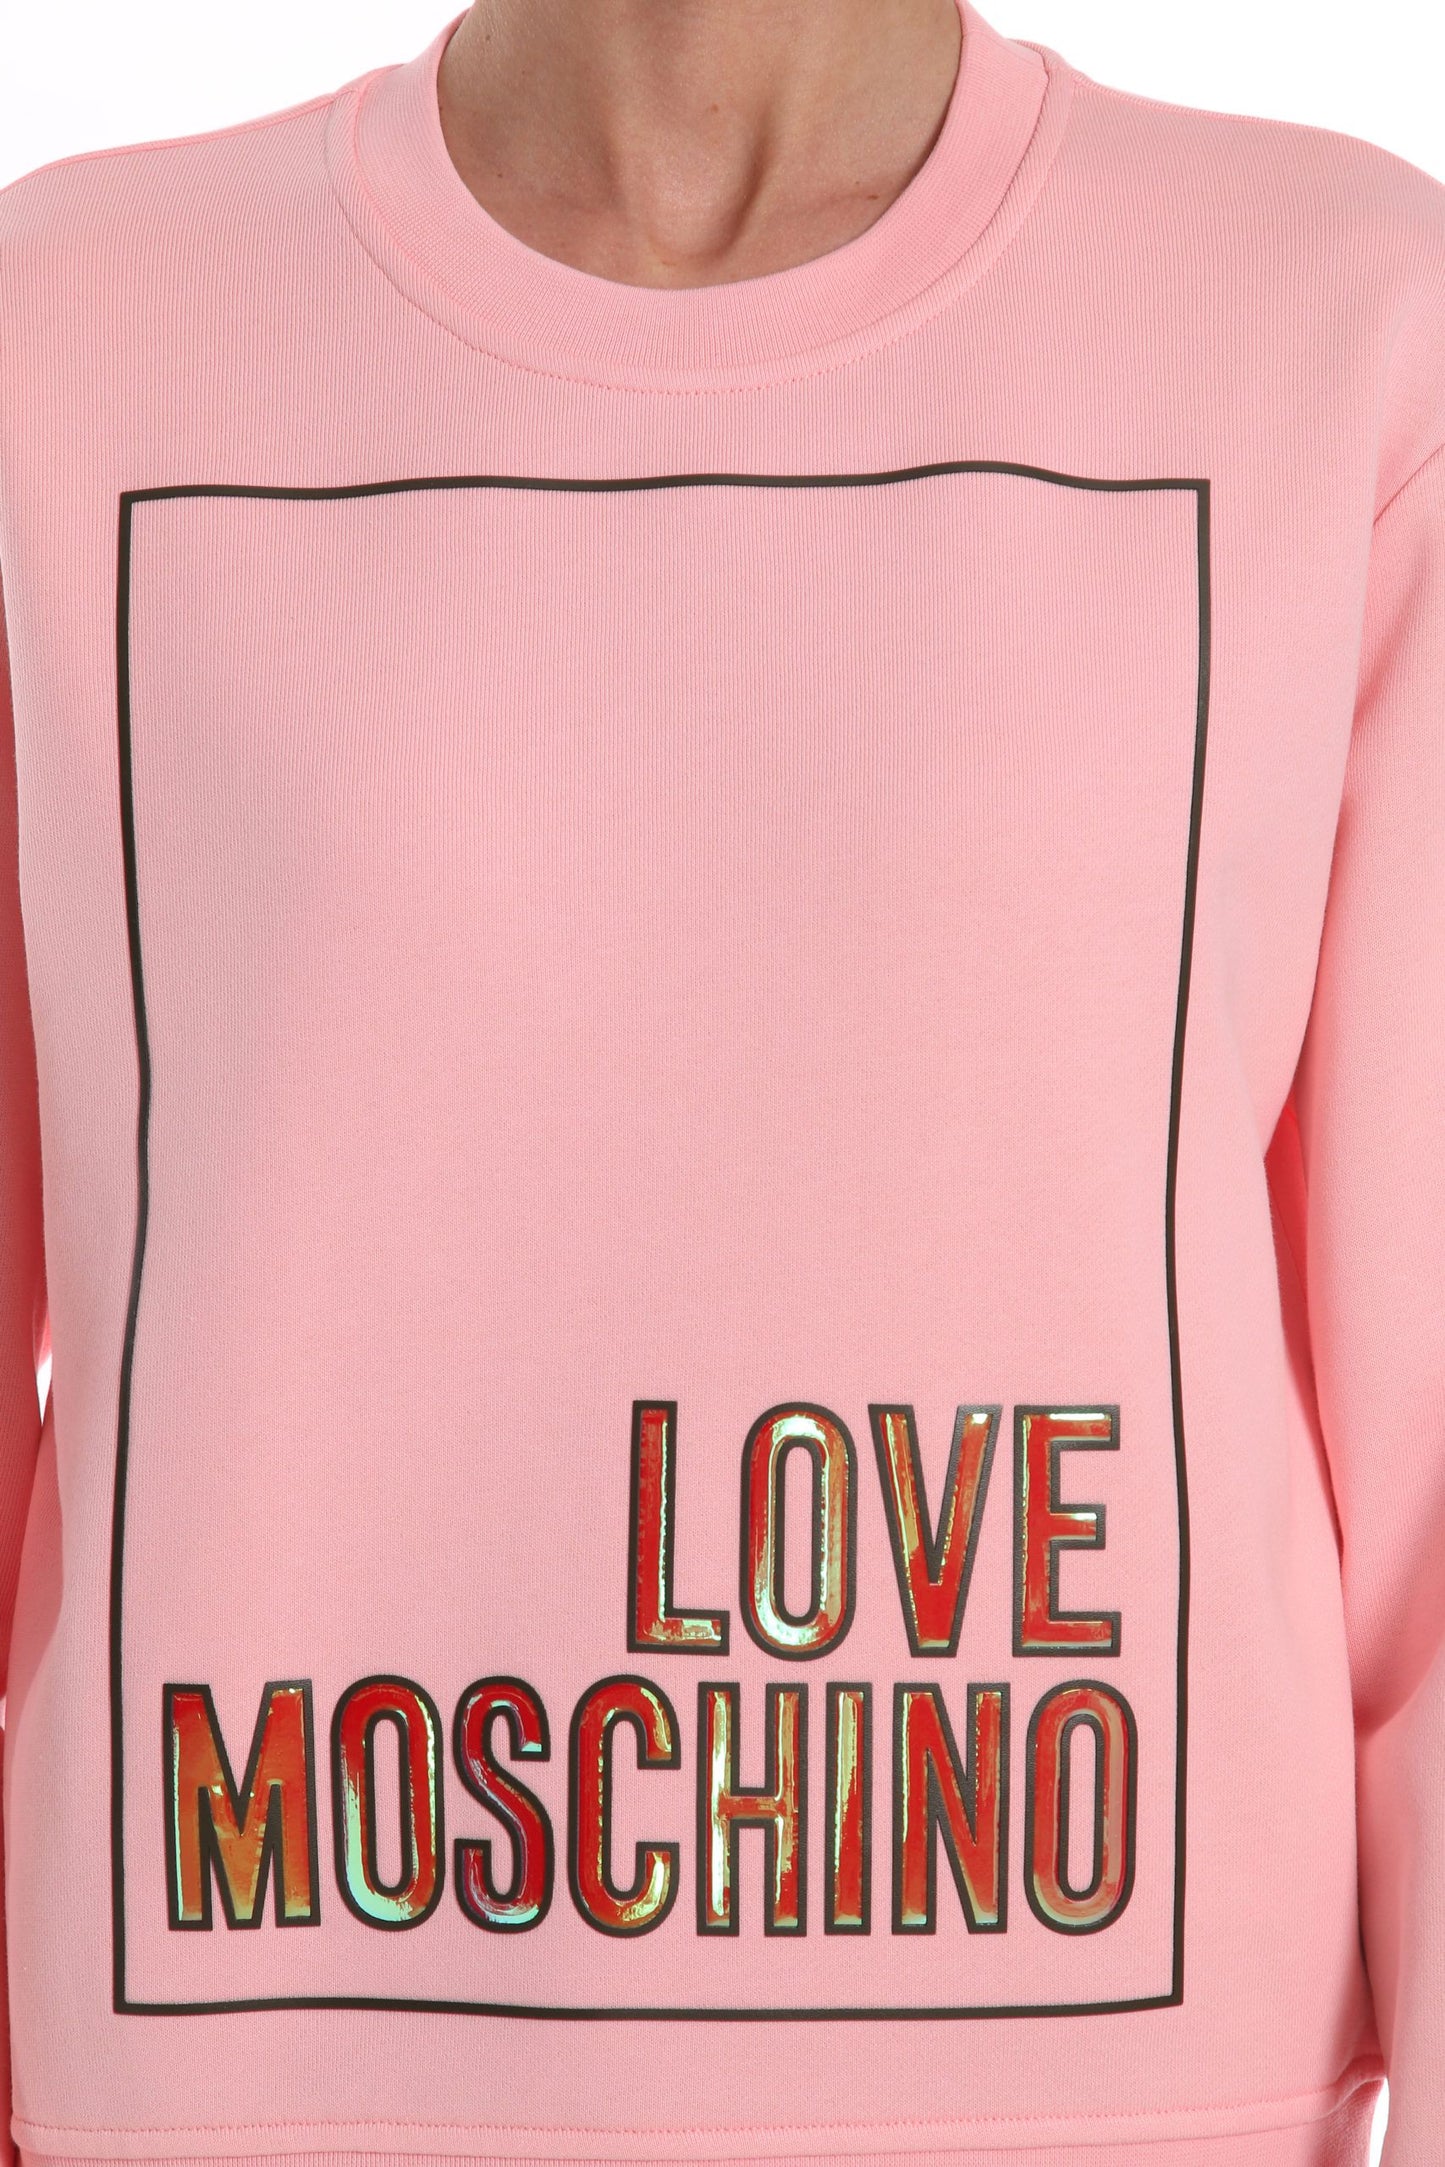 Love Moschino Chic Graphic Cotton T-Shirt Dress in Pink